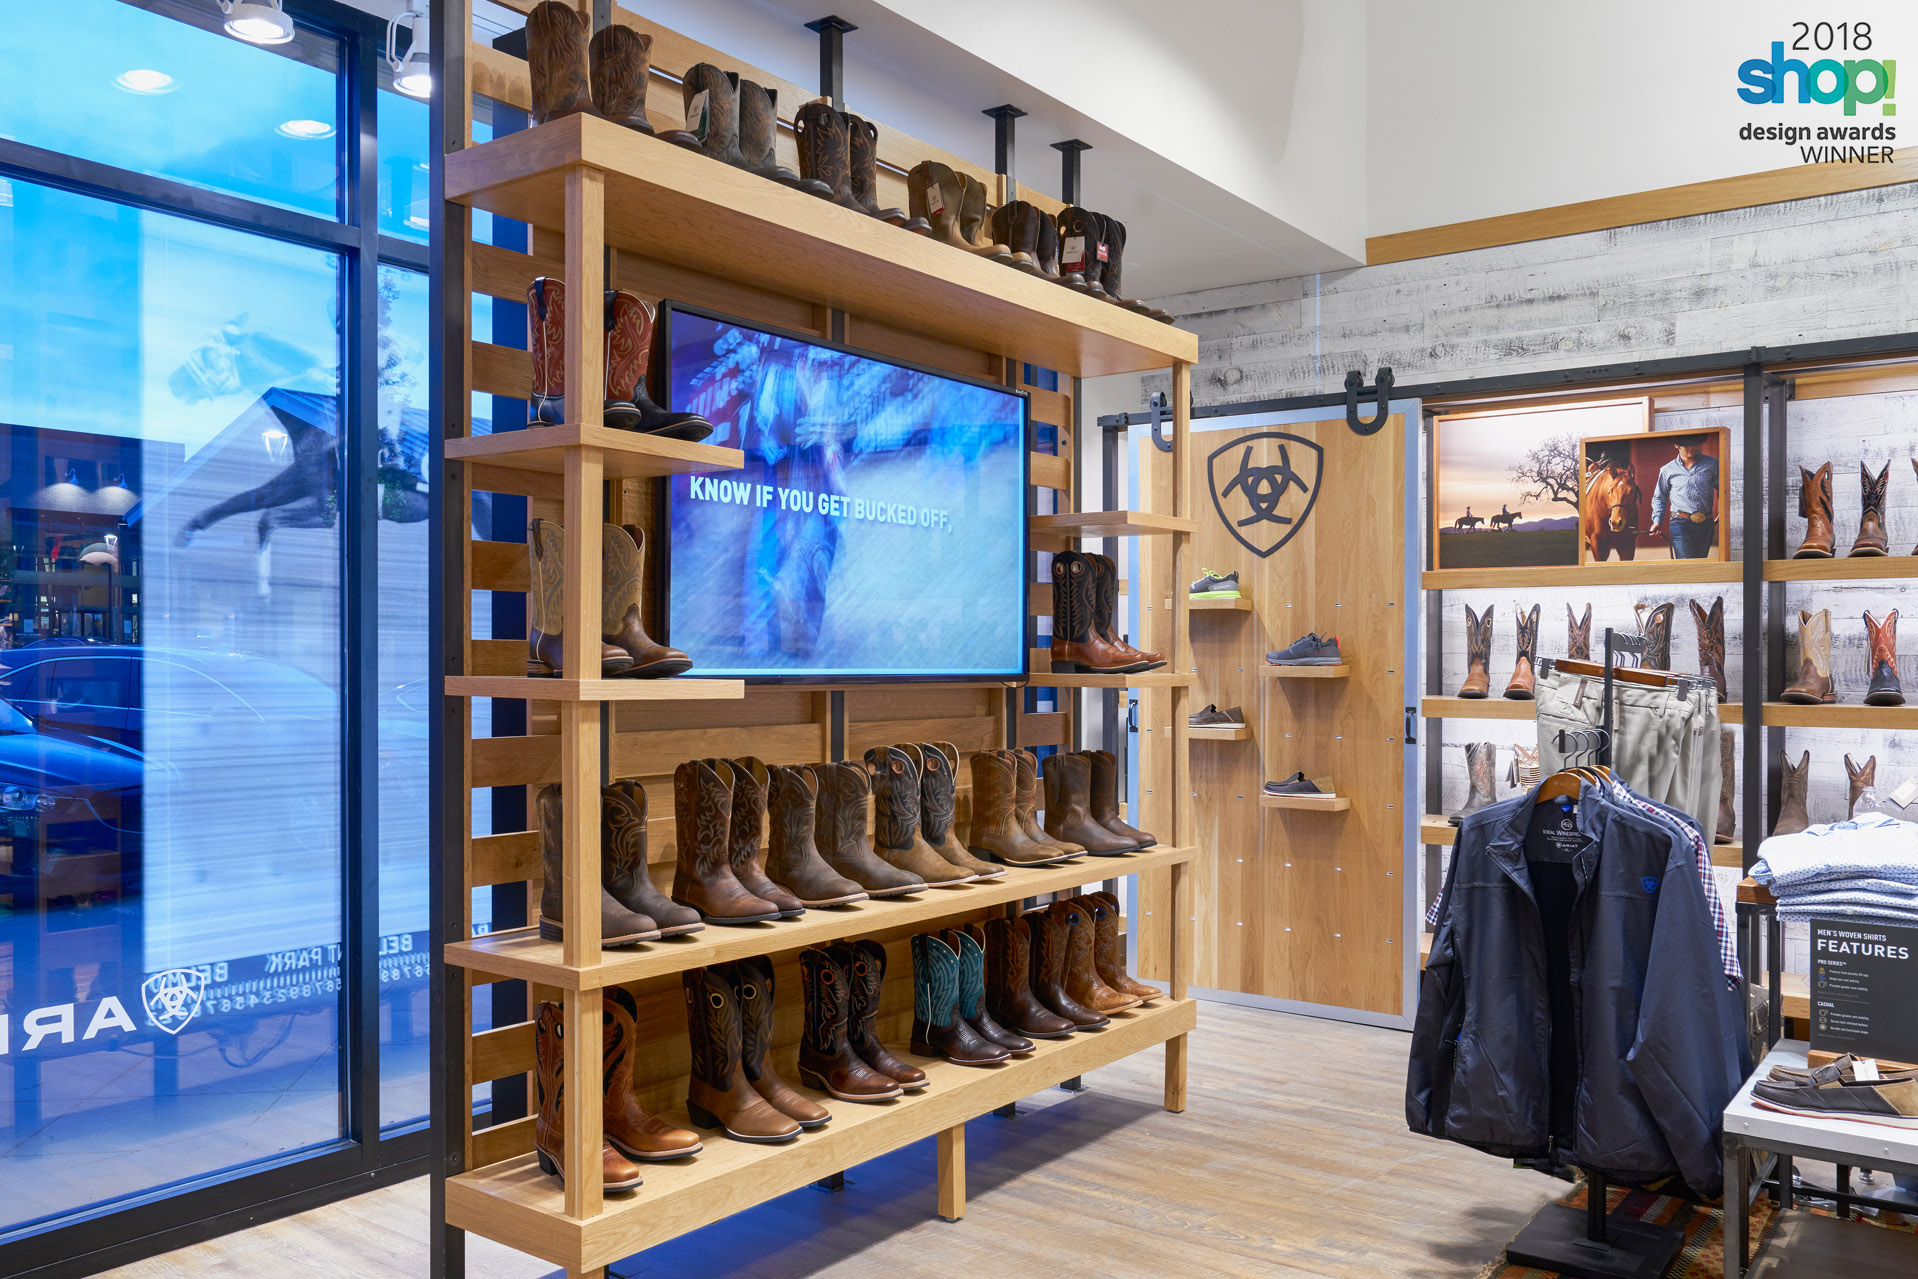 ariat factory outlet